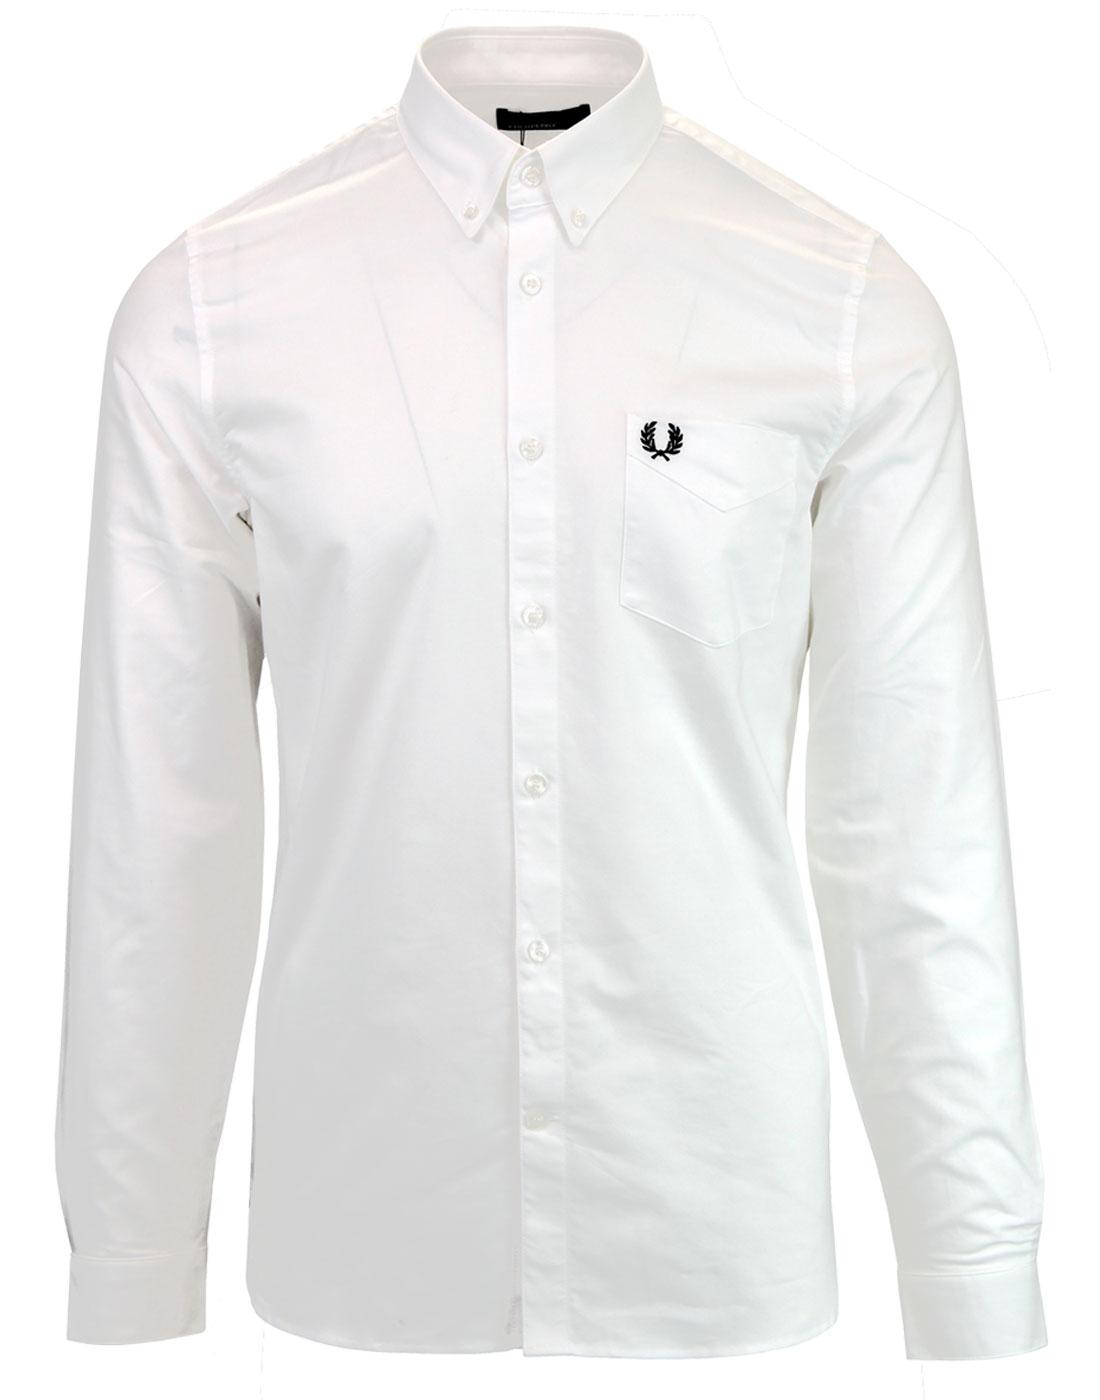 FRED PERRY Retro Mod Indie Oxford Shirt